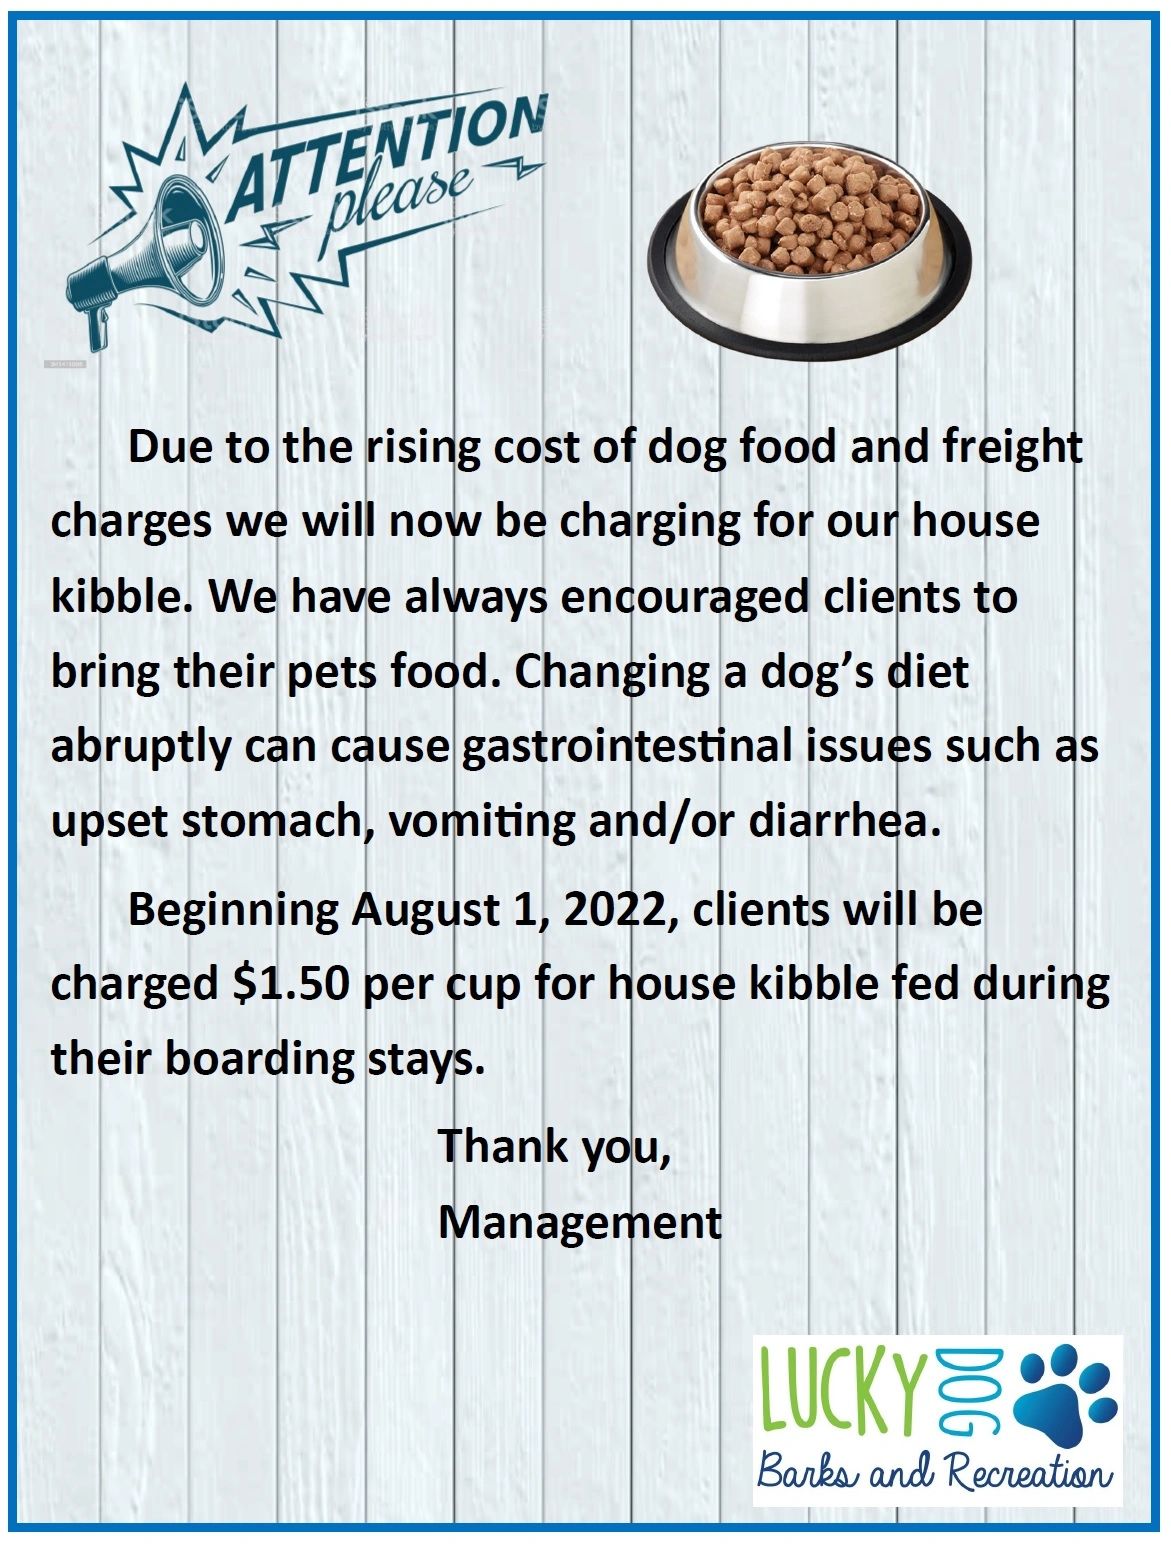 new charge for in-house dog food during boarding